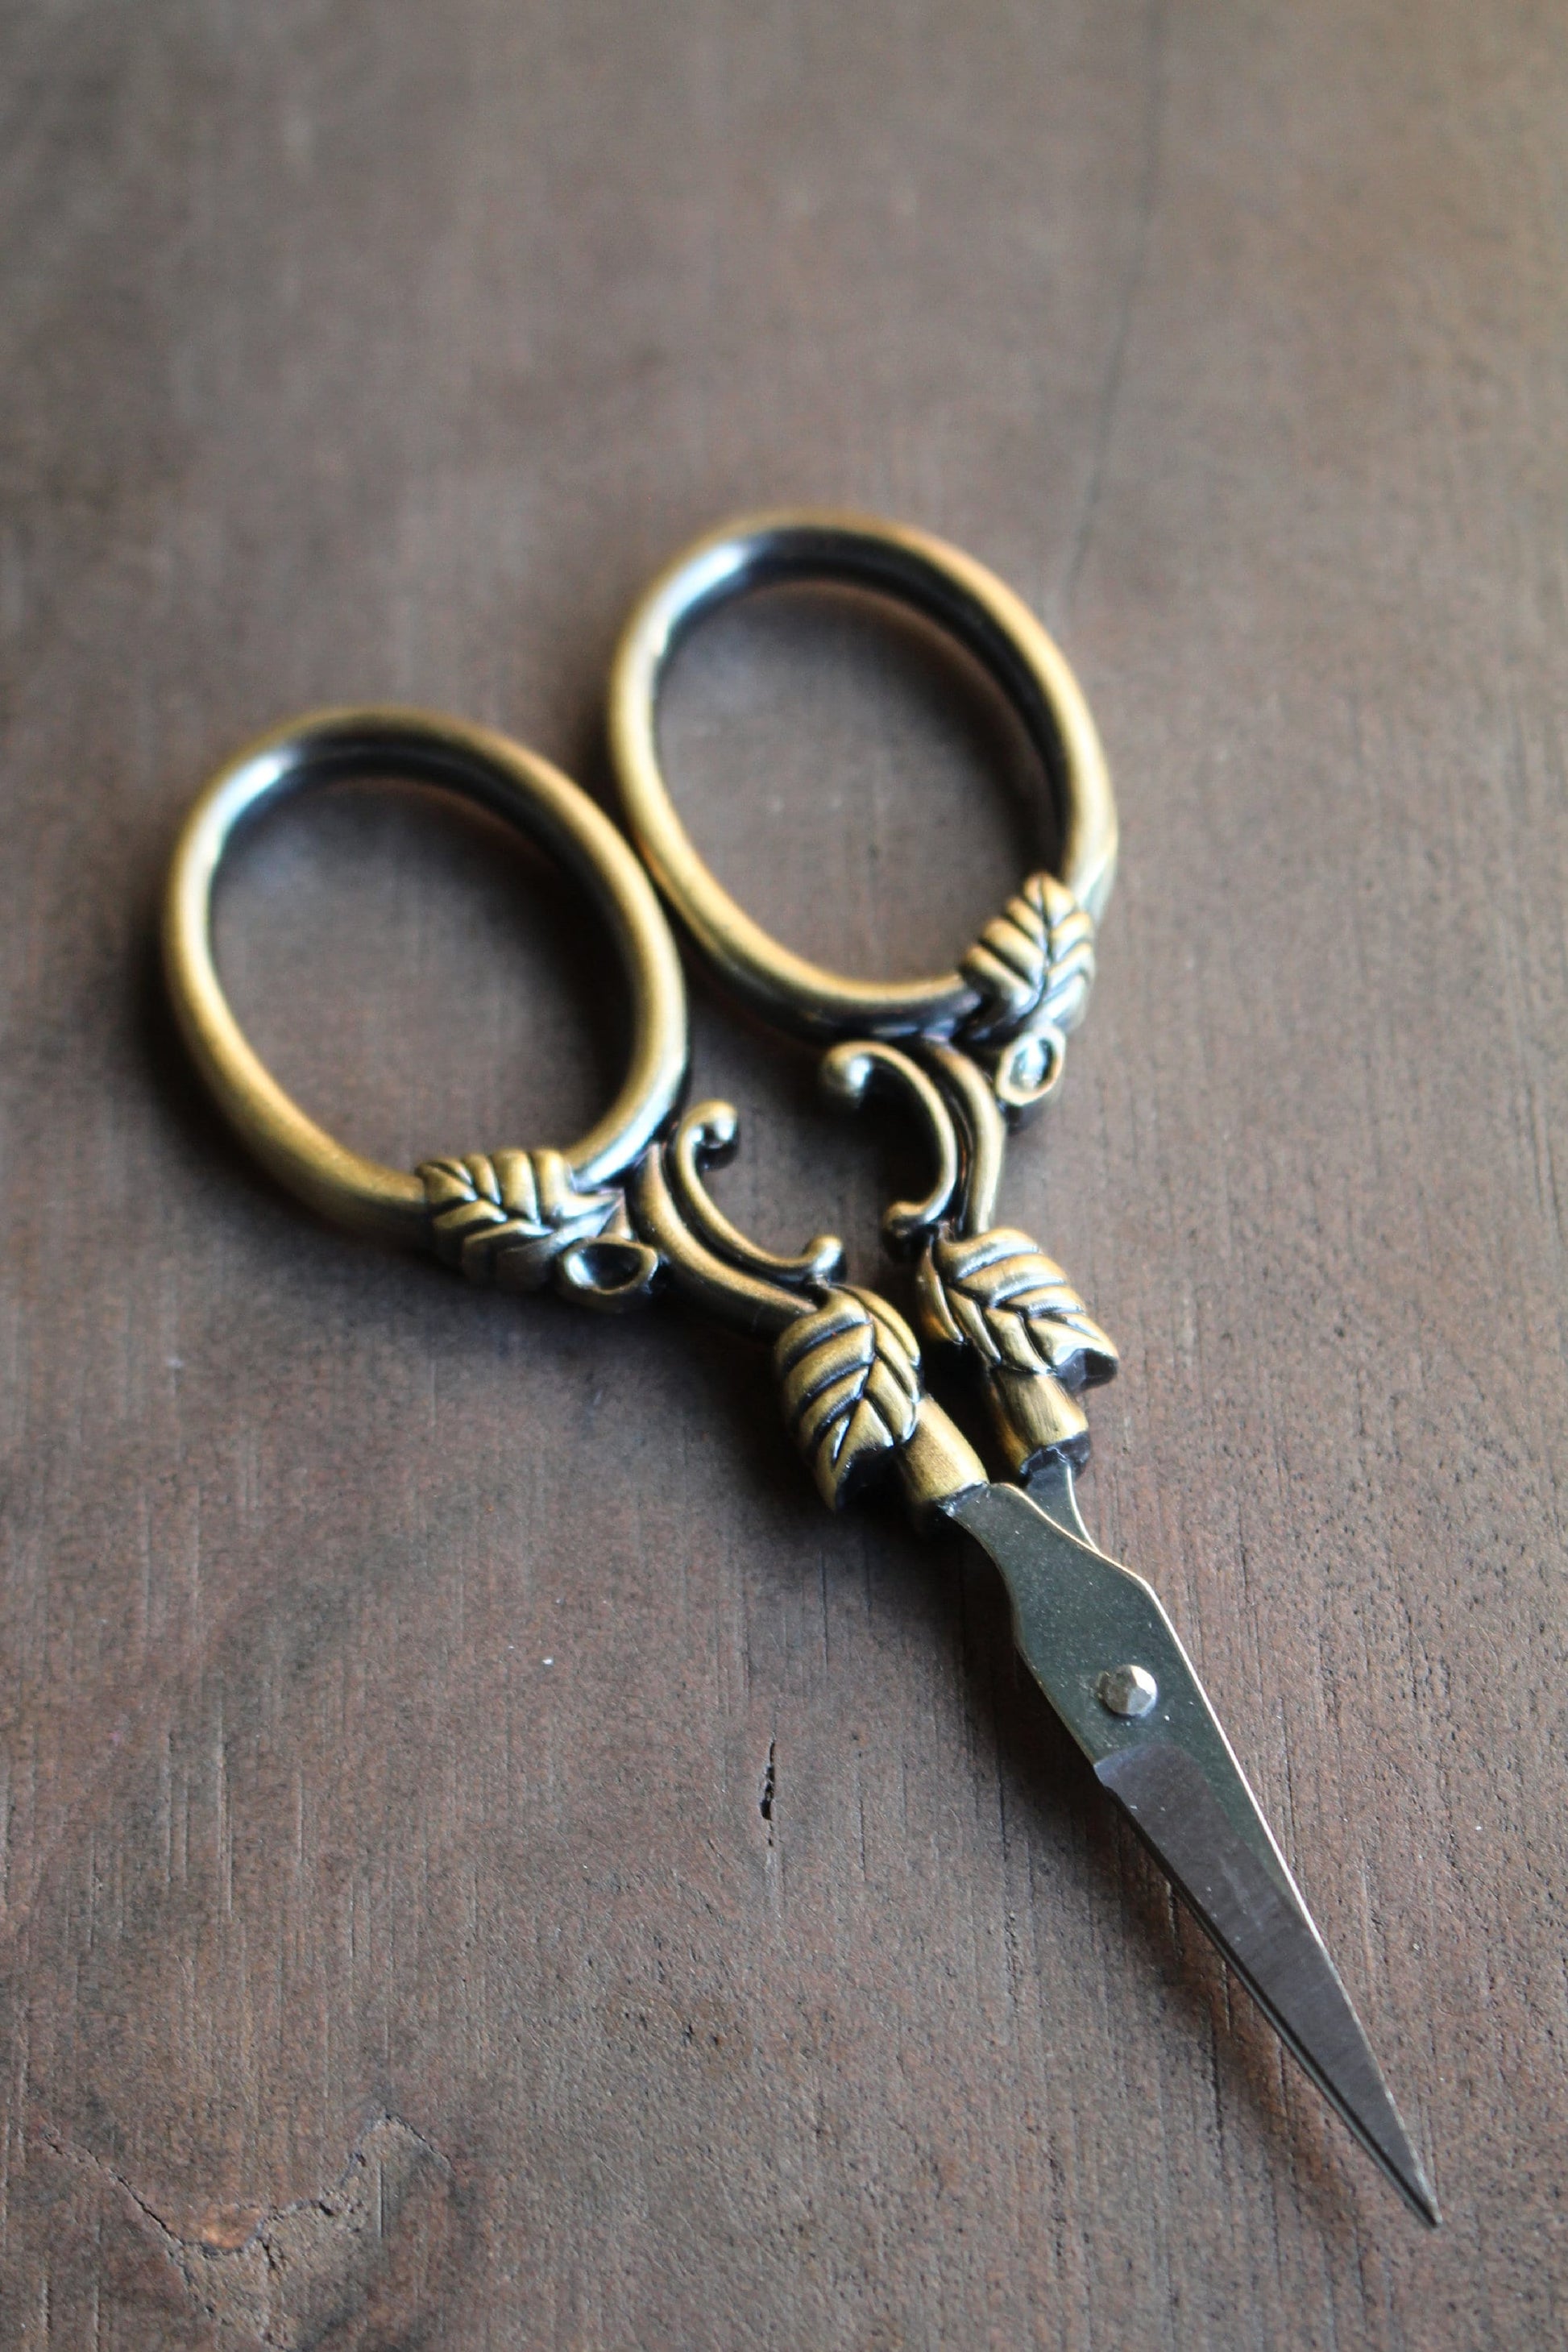 English Ivy Embroidery Scissors • Vintage Style Quilting Scissors in Antique Gold and Copper • Gifts for Mothers and Grandmothers